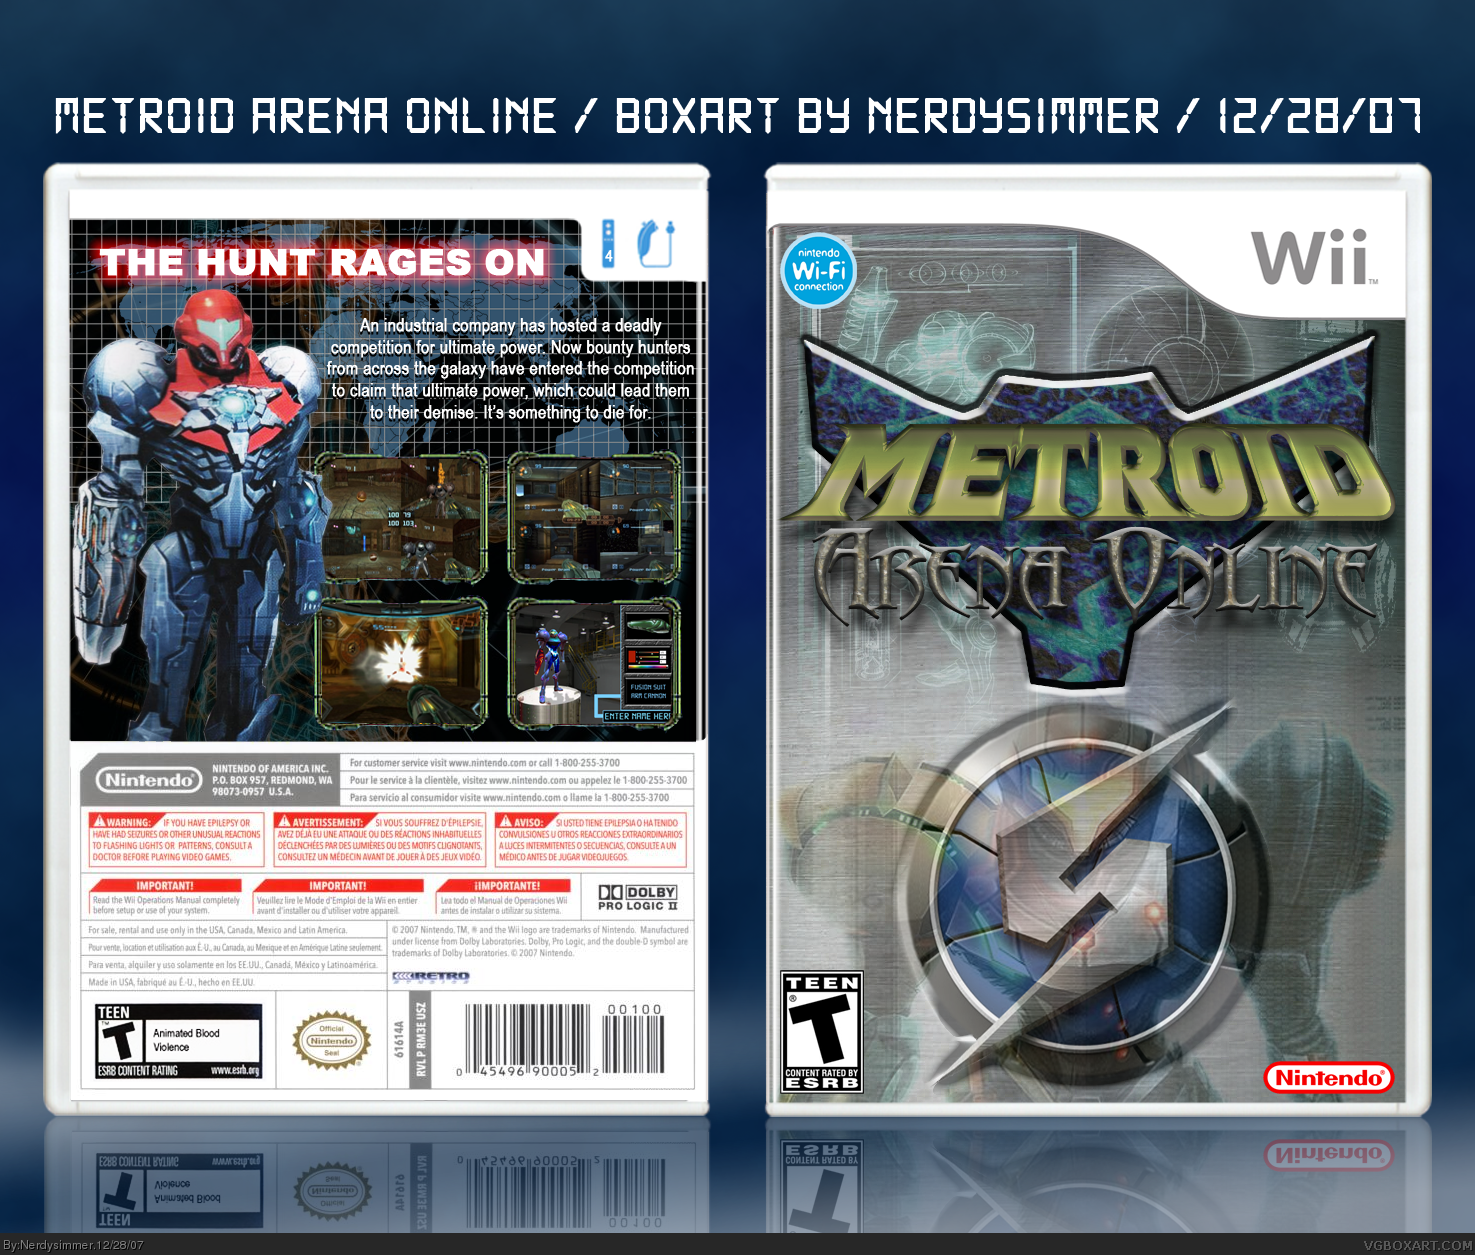 Metroid Arena Online box cover